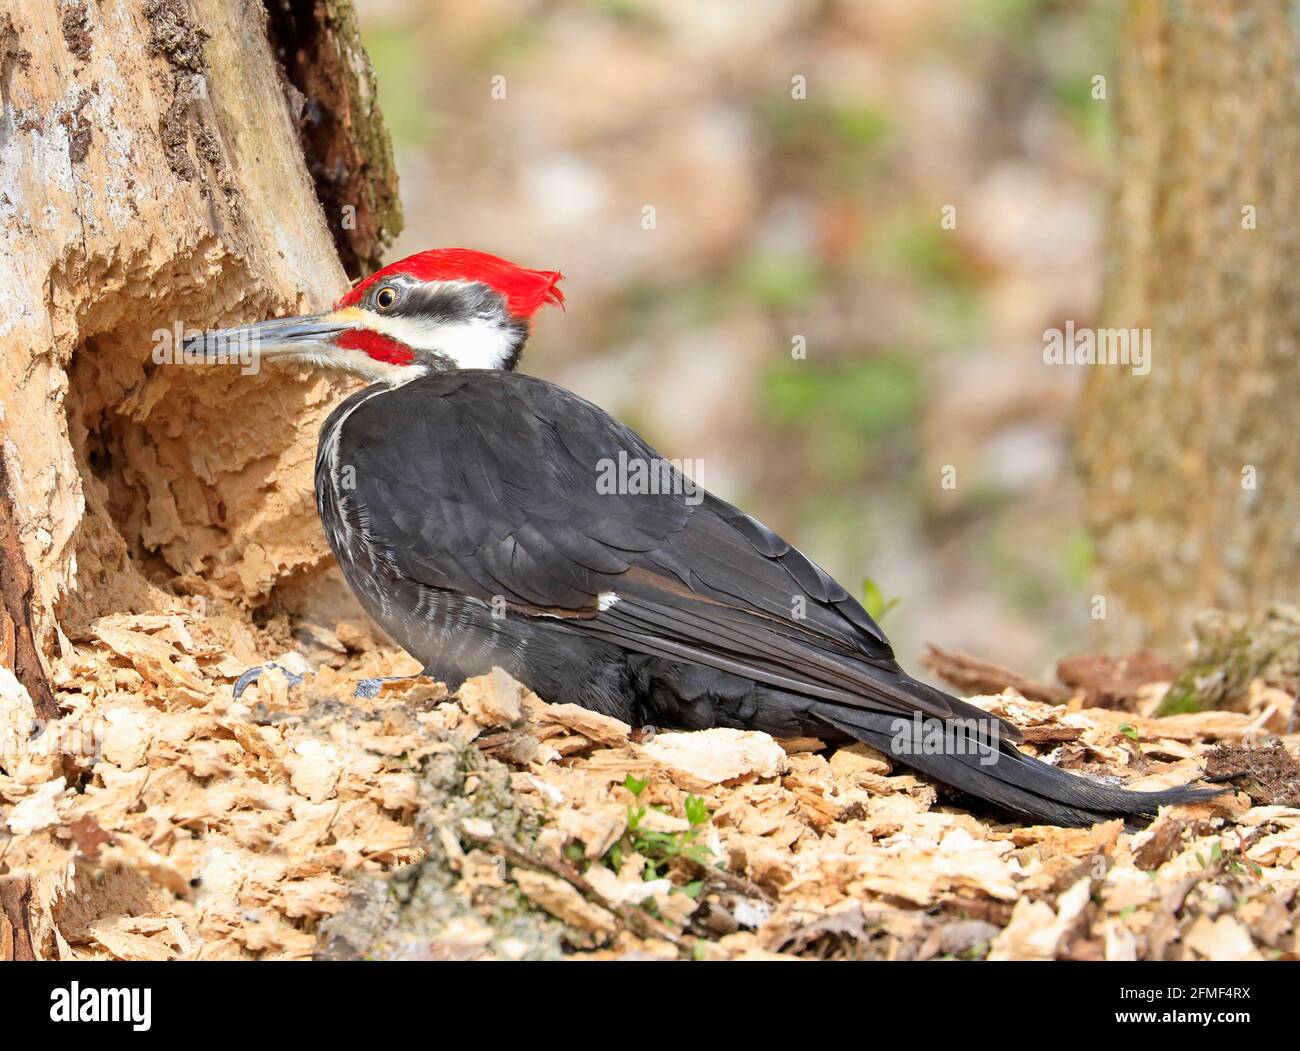 Pileated woodpecker cut out a hole on a tree trunk into the forest, Quebec, Canada Stock Photo